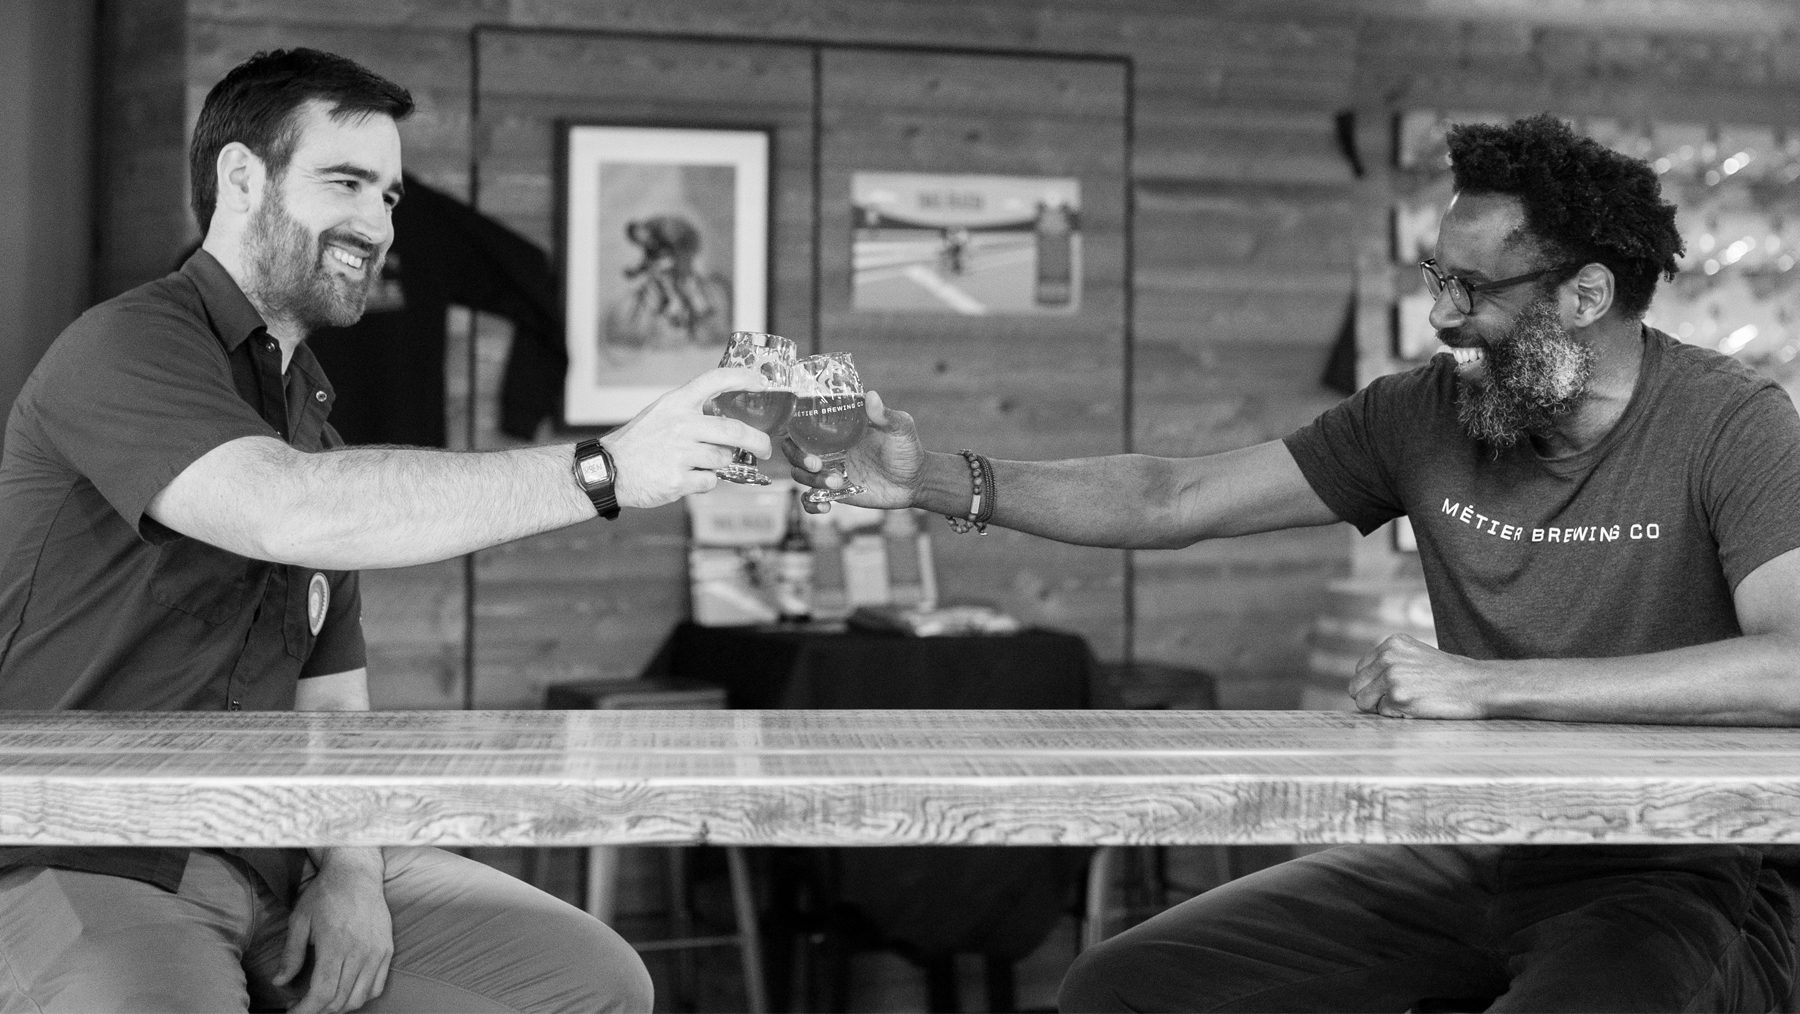 Black and white image of 2 MBC employees clinking glasses of beer together